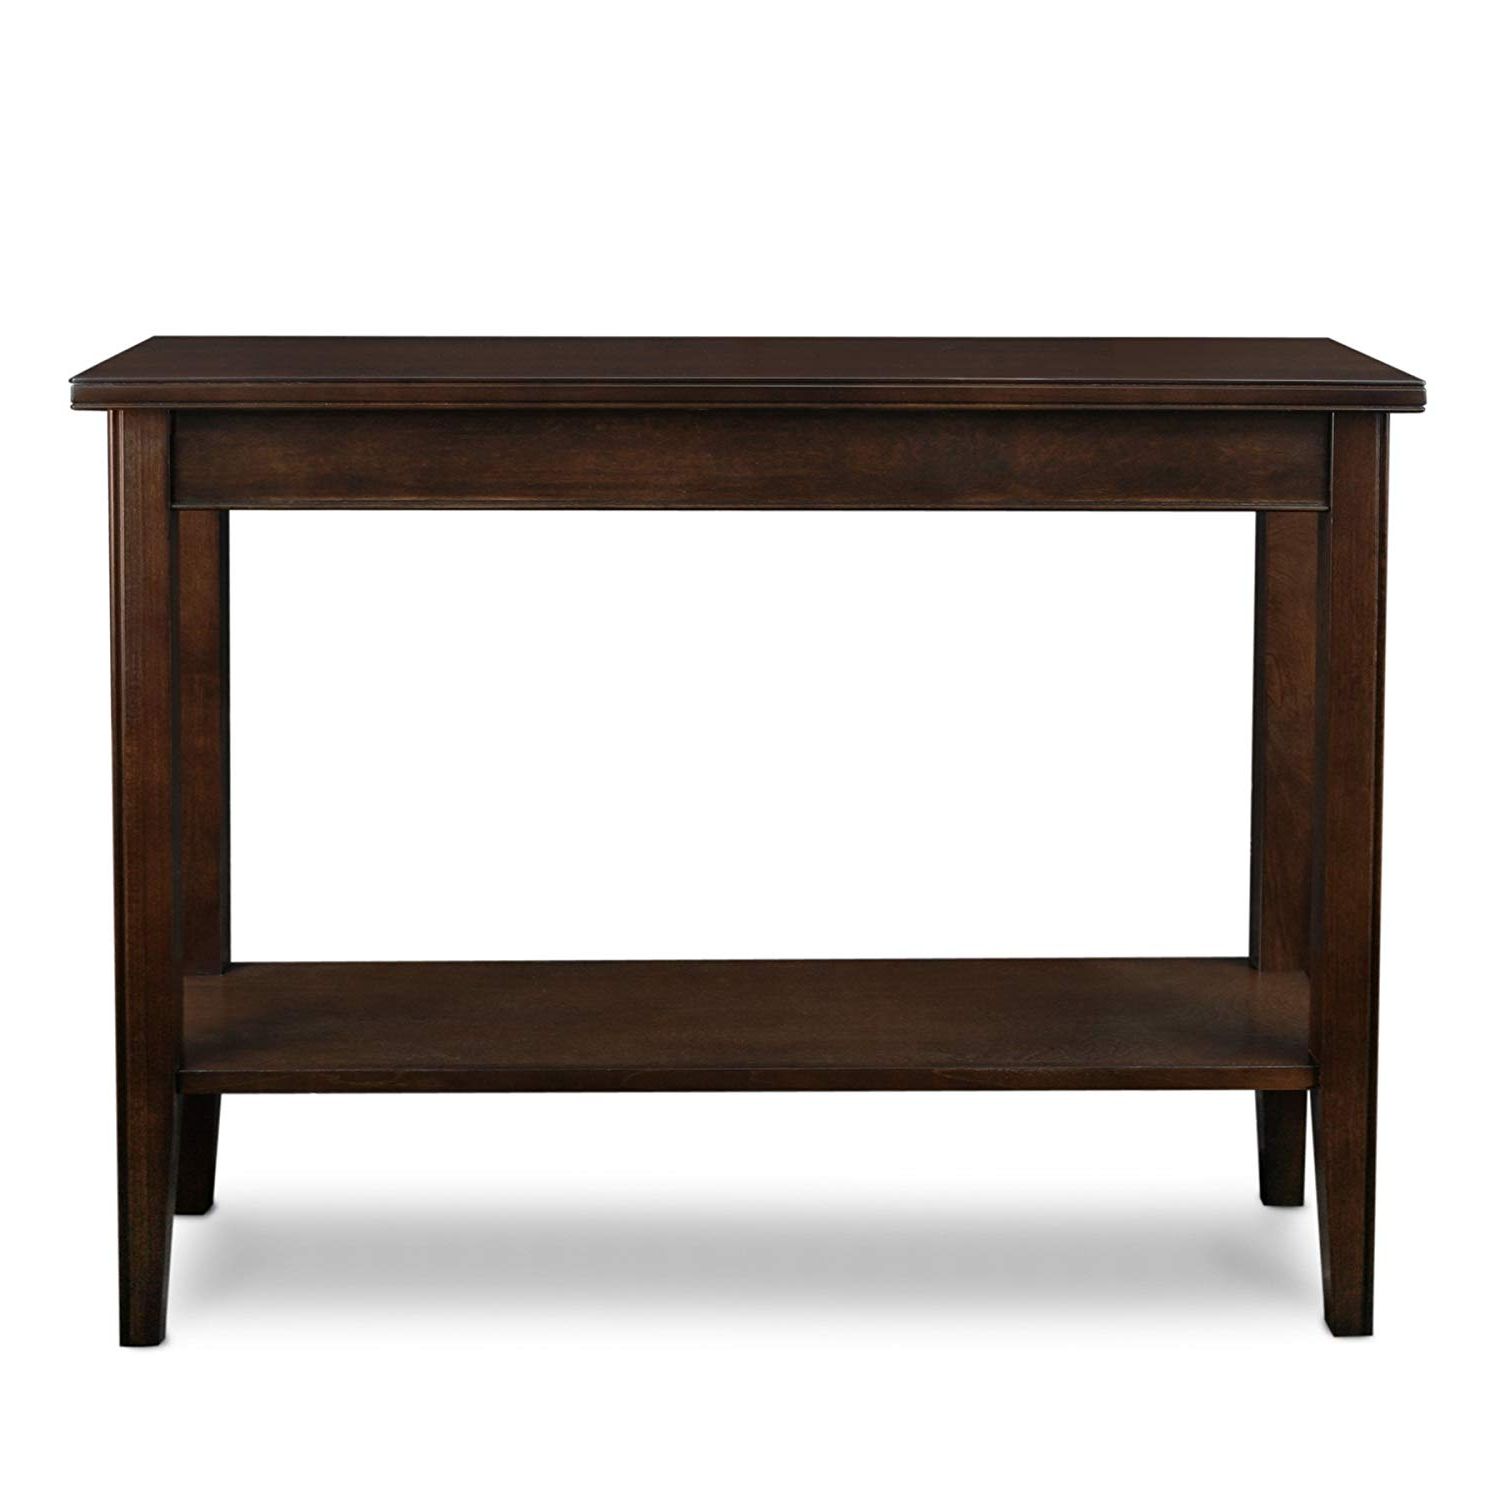 Favorite Amazon: Leick Laurent Hall Console Table: Kitchen & Dining Inside Layered Wood Small Square Console Tables (Photo 10 of 20)